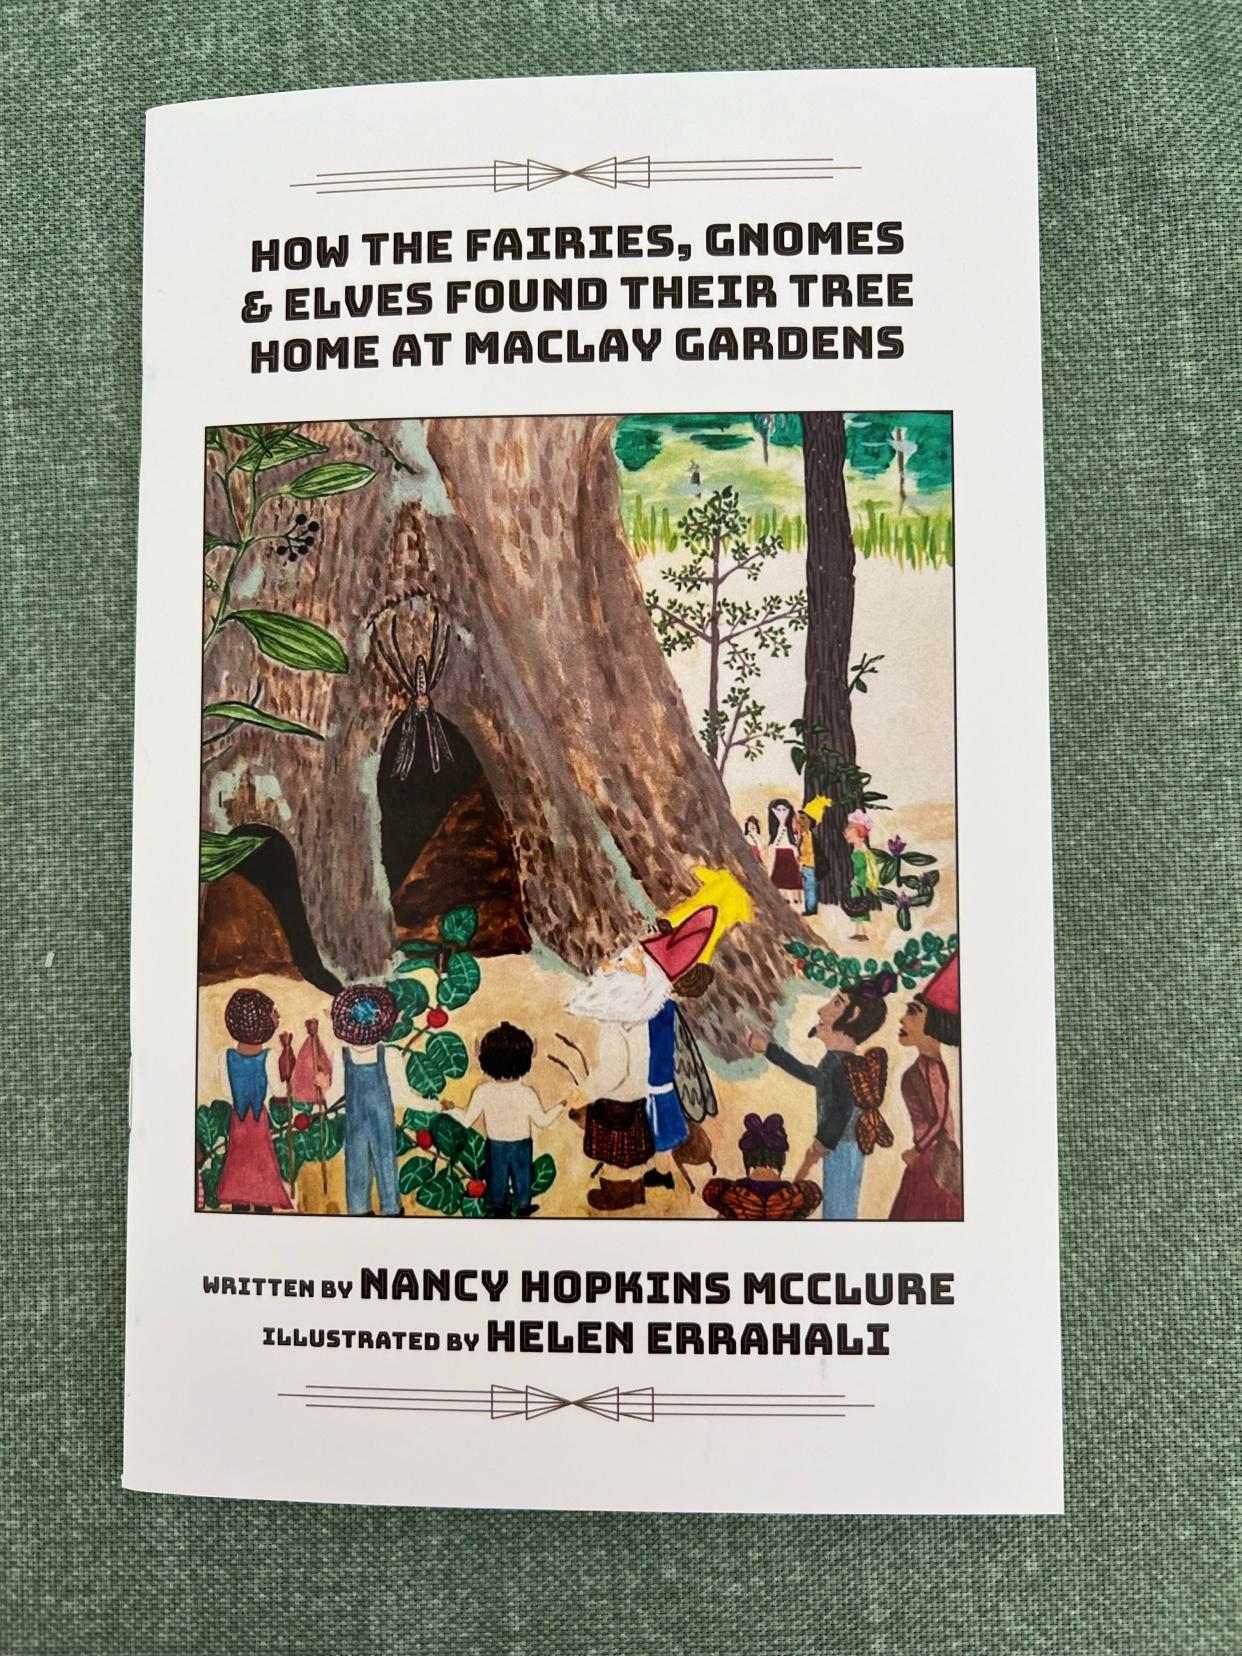 Booklet created by Nancy McClure and Helen Errahali, about the wee ones and the old live oak at Maclay Gardens.